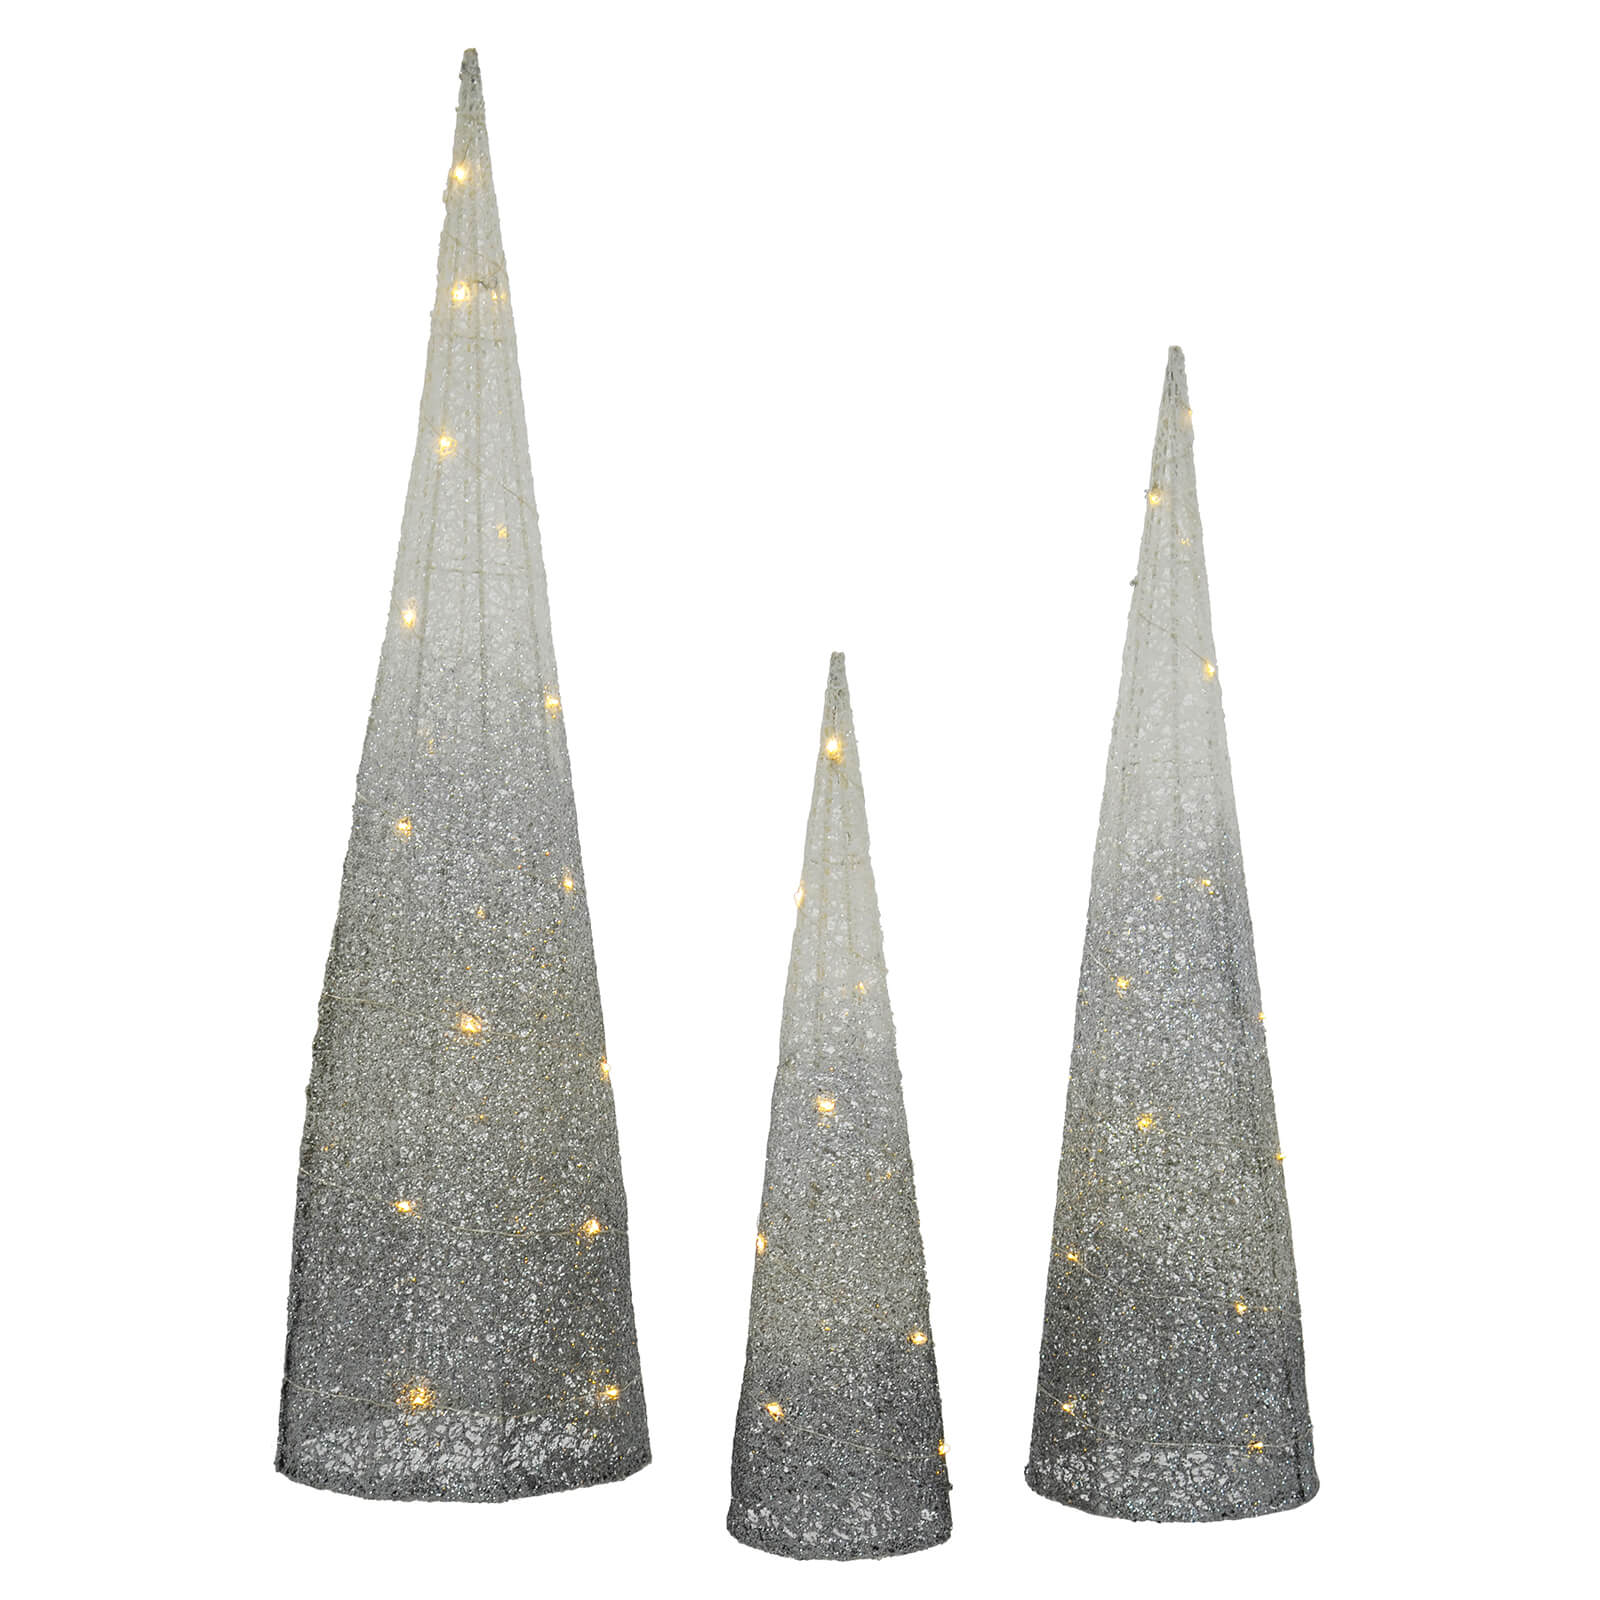 Set of 3 silver to white ombre glitter mesh Christmas trees with warm white LED lights